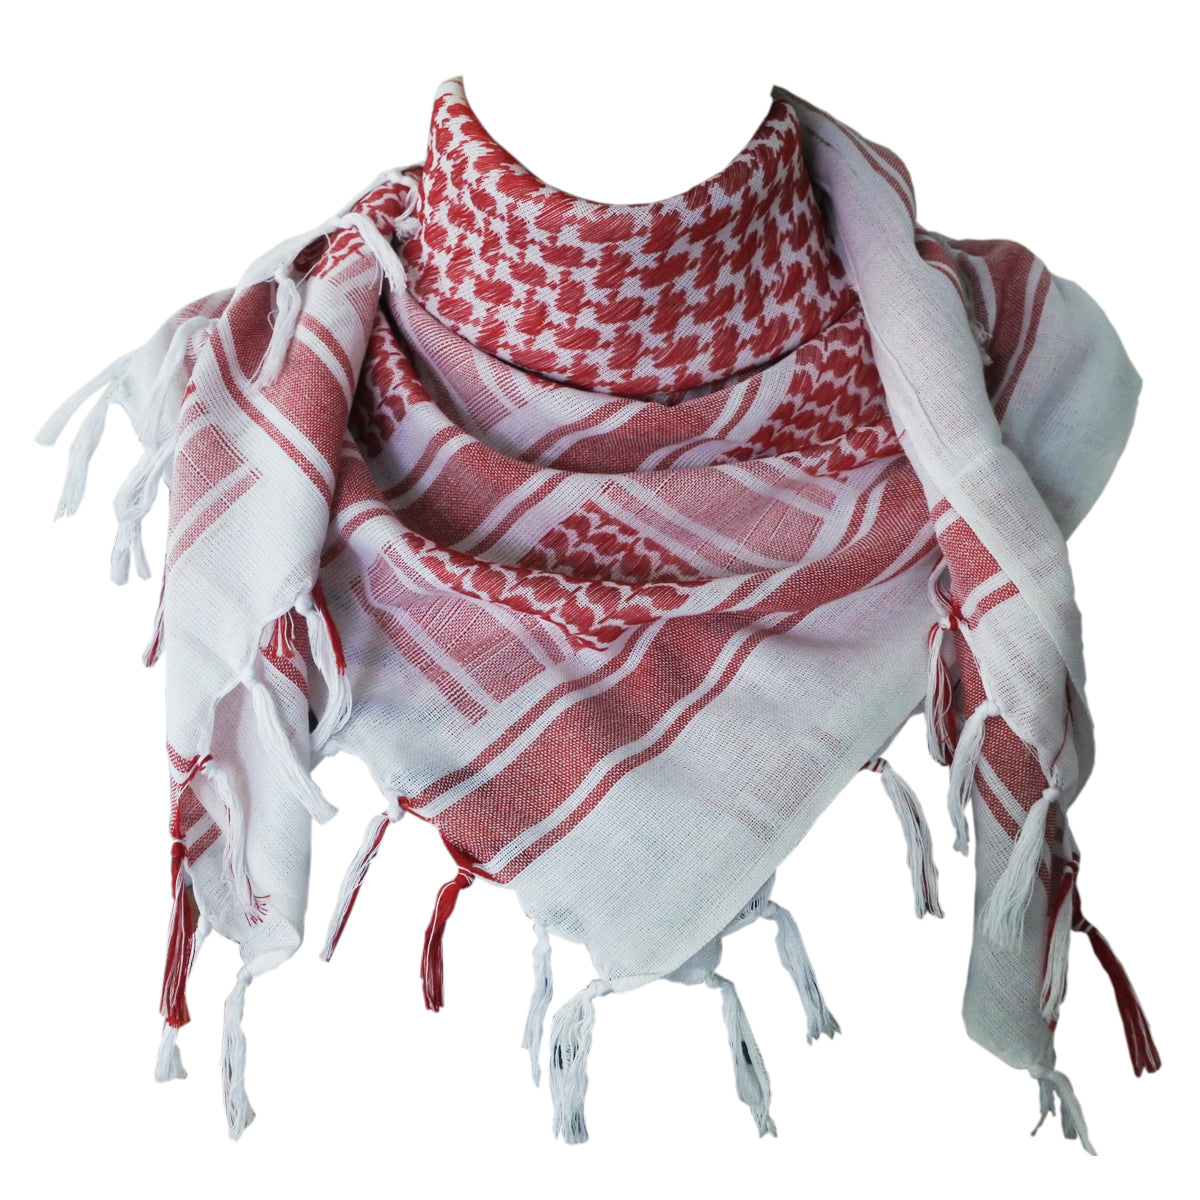 Tactical Hunting Scarf Military Shemagh Tactical Desert Keffiyeh